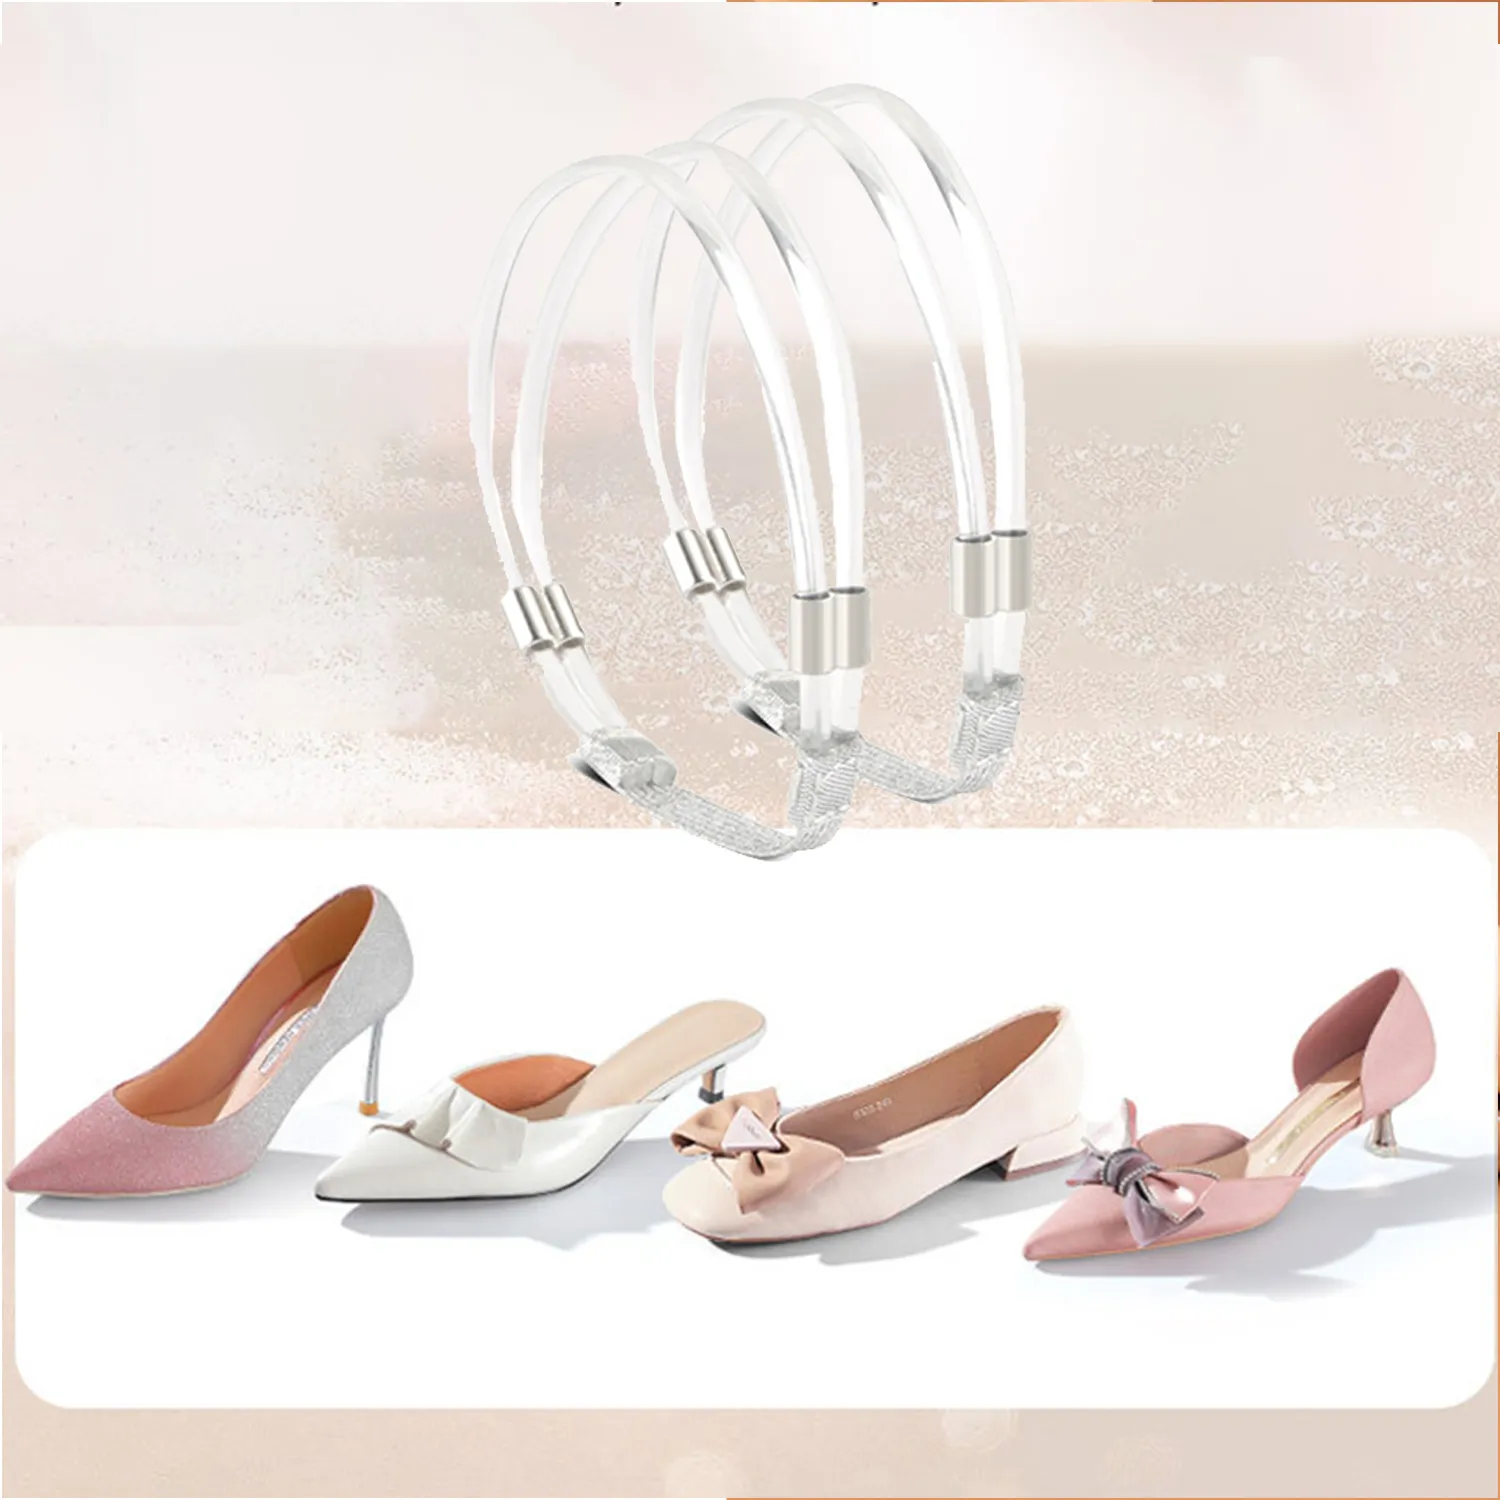 1 Pair Transparent High Heeled Shoelaces Women Anti-Slip Elastic Strap Shoelace Ankle Tie Strap Band For Locking High Heels